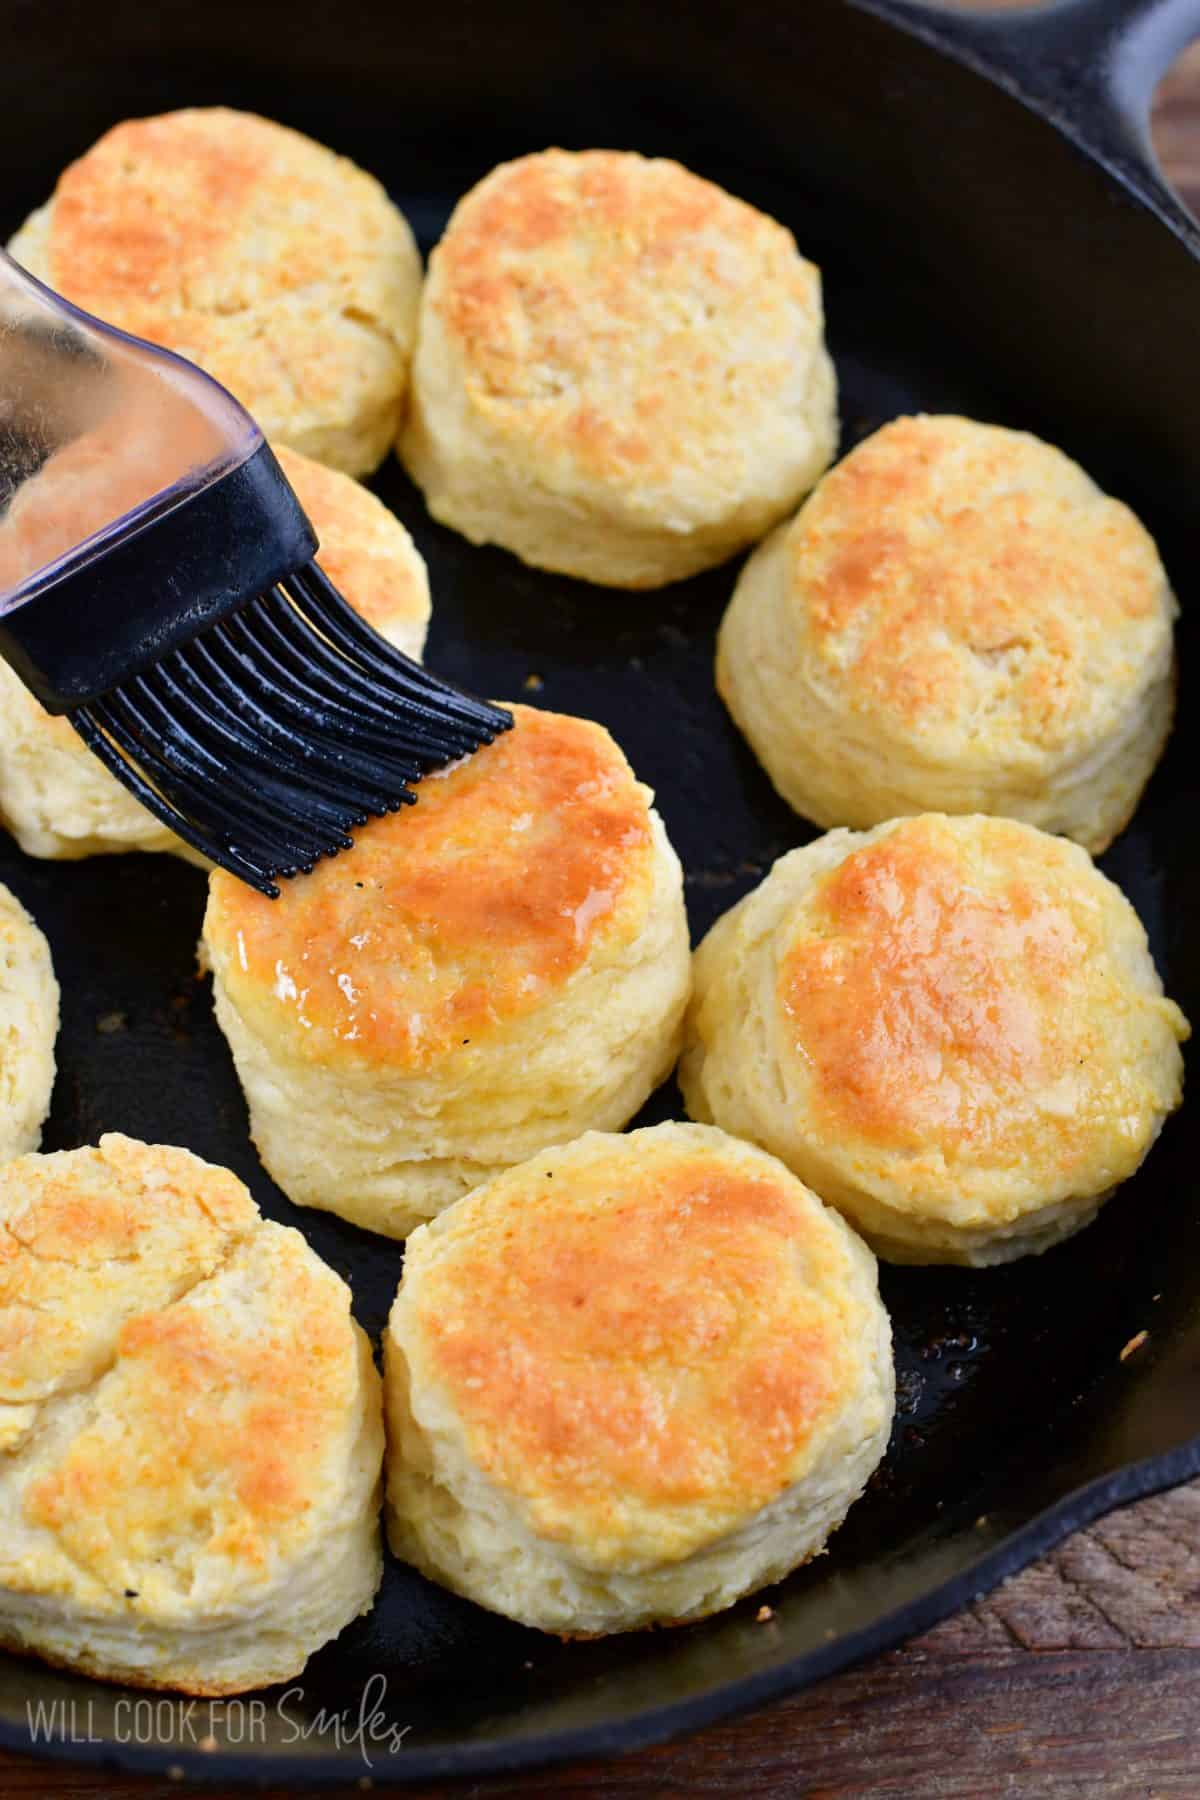 Brushing butter on cooked buttermilk biscuits in a skillet.